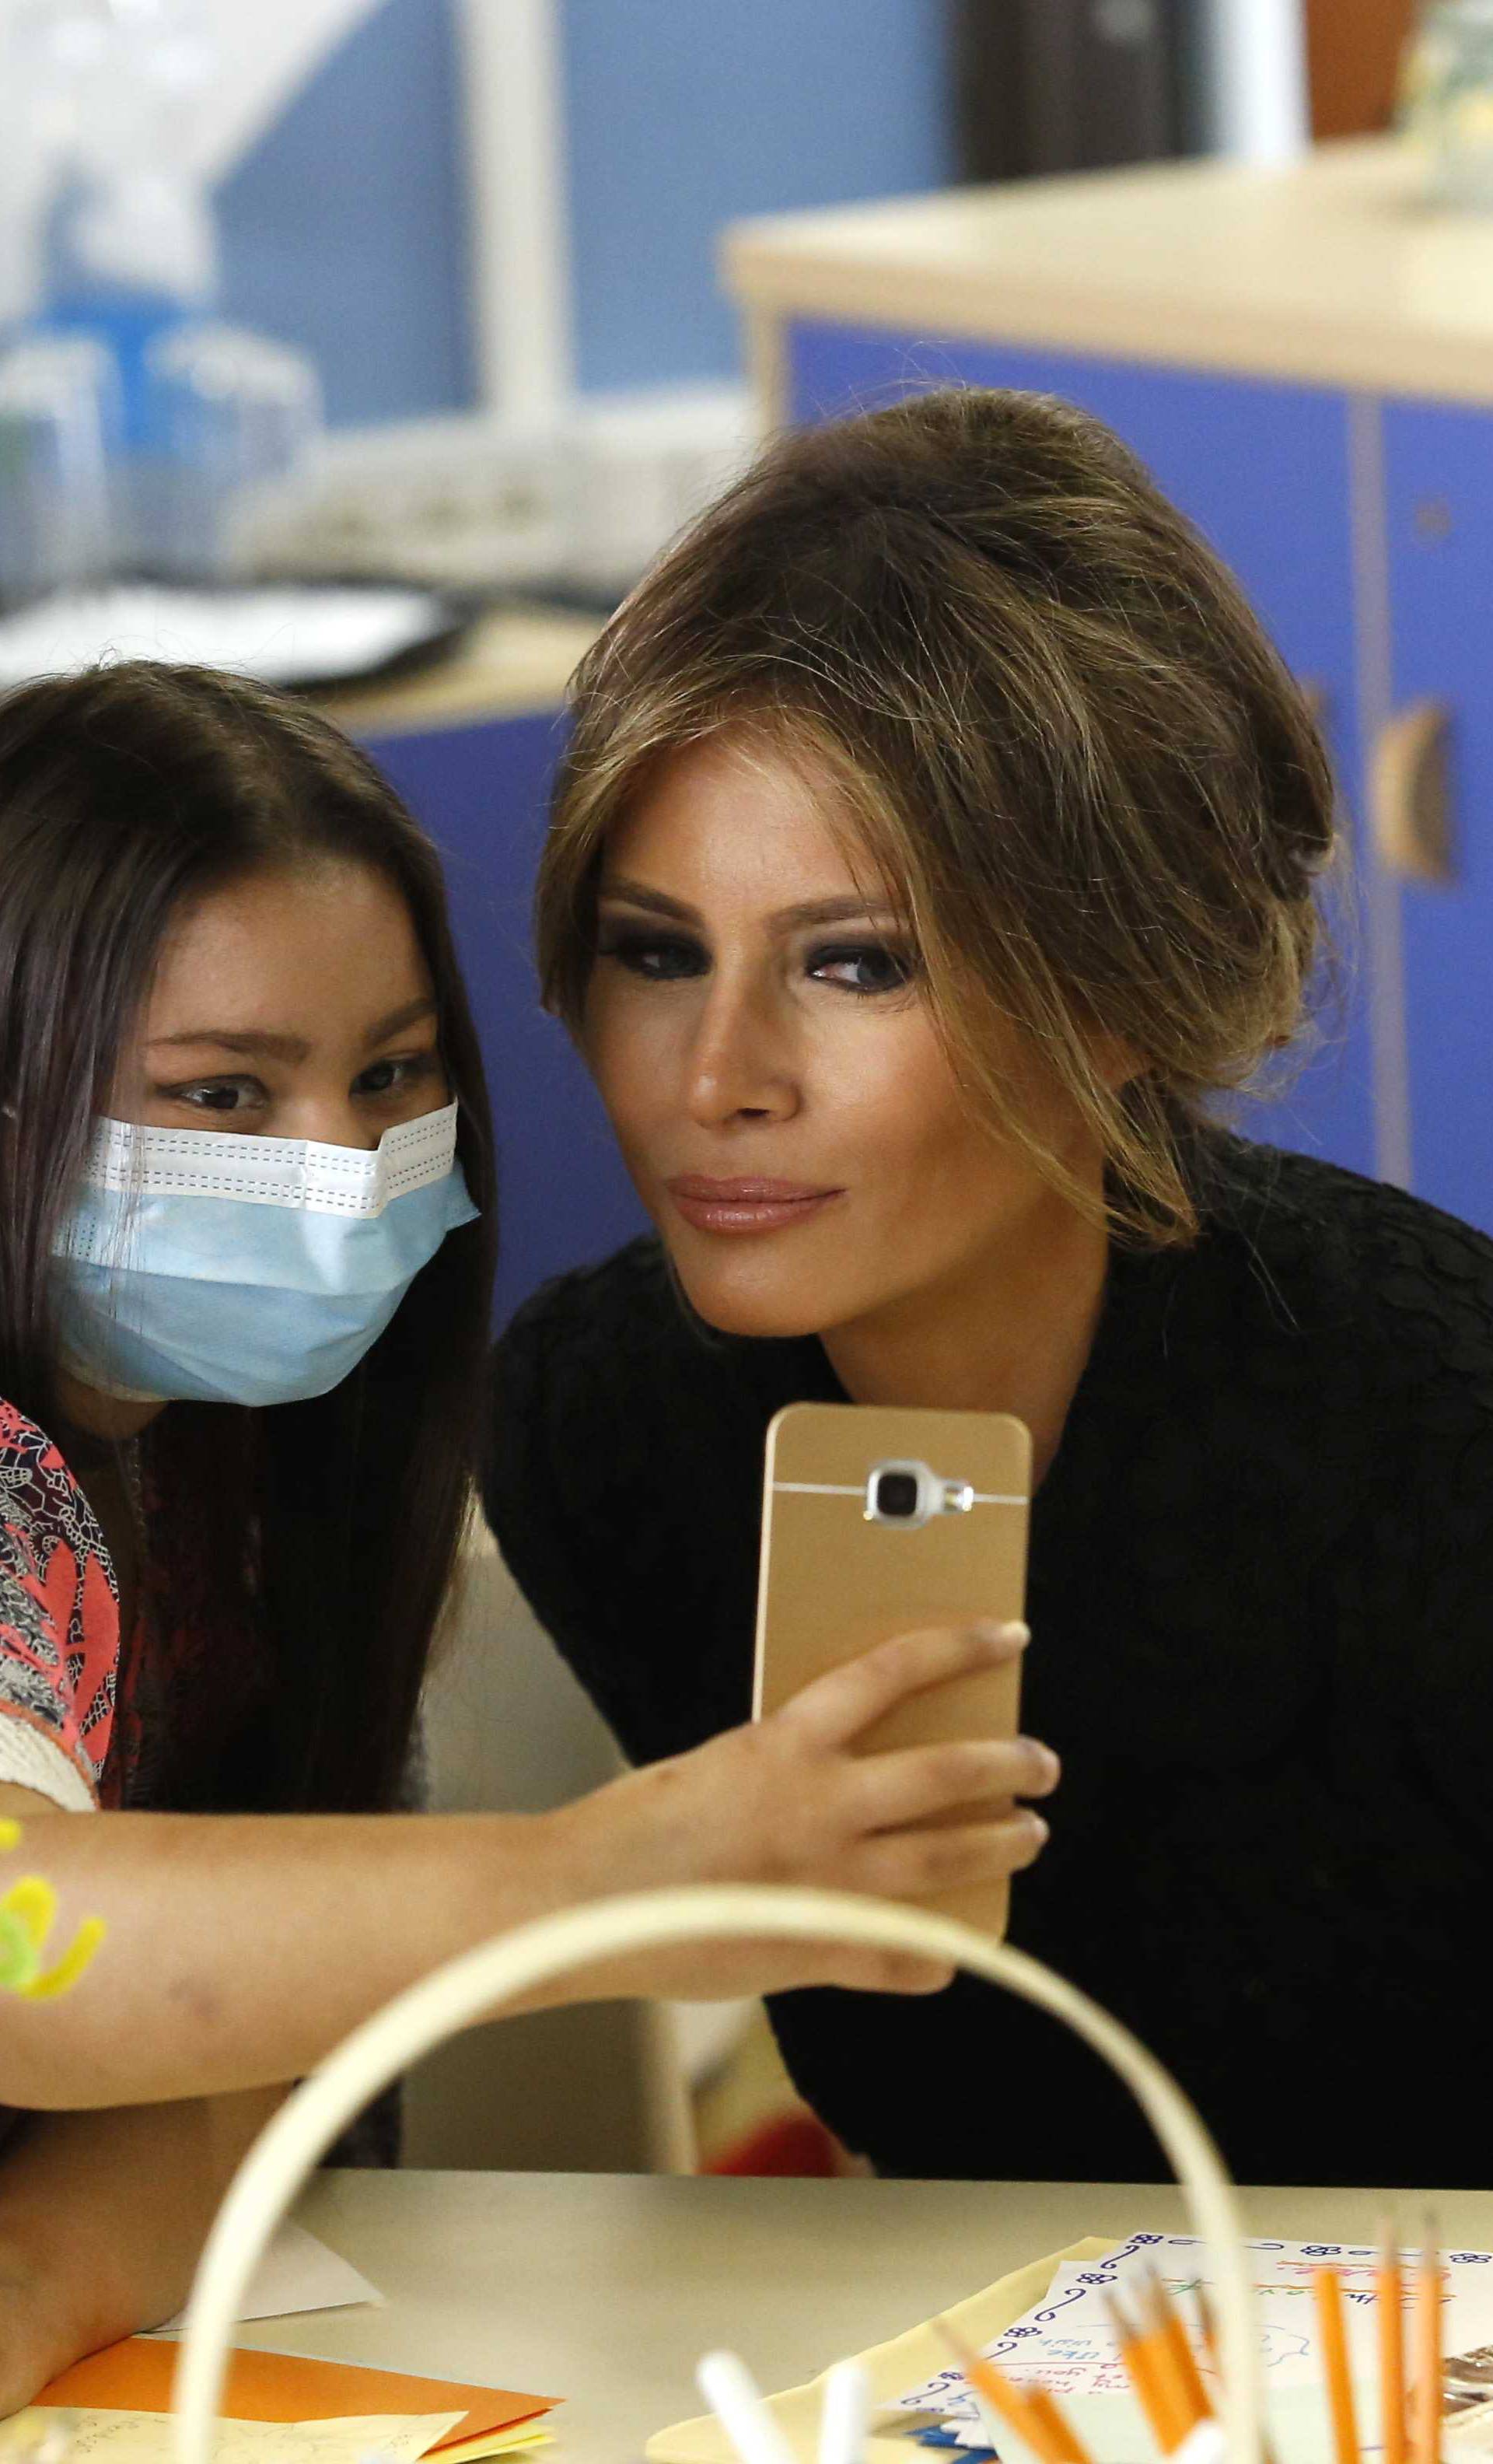 A girl takes a selfie with U.S. first lady Trump at the Bambino Gesu hospital in Rome